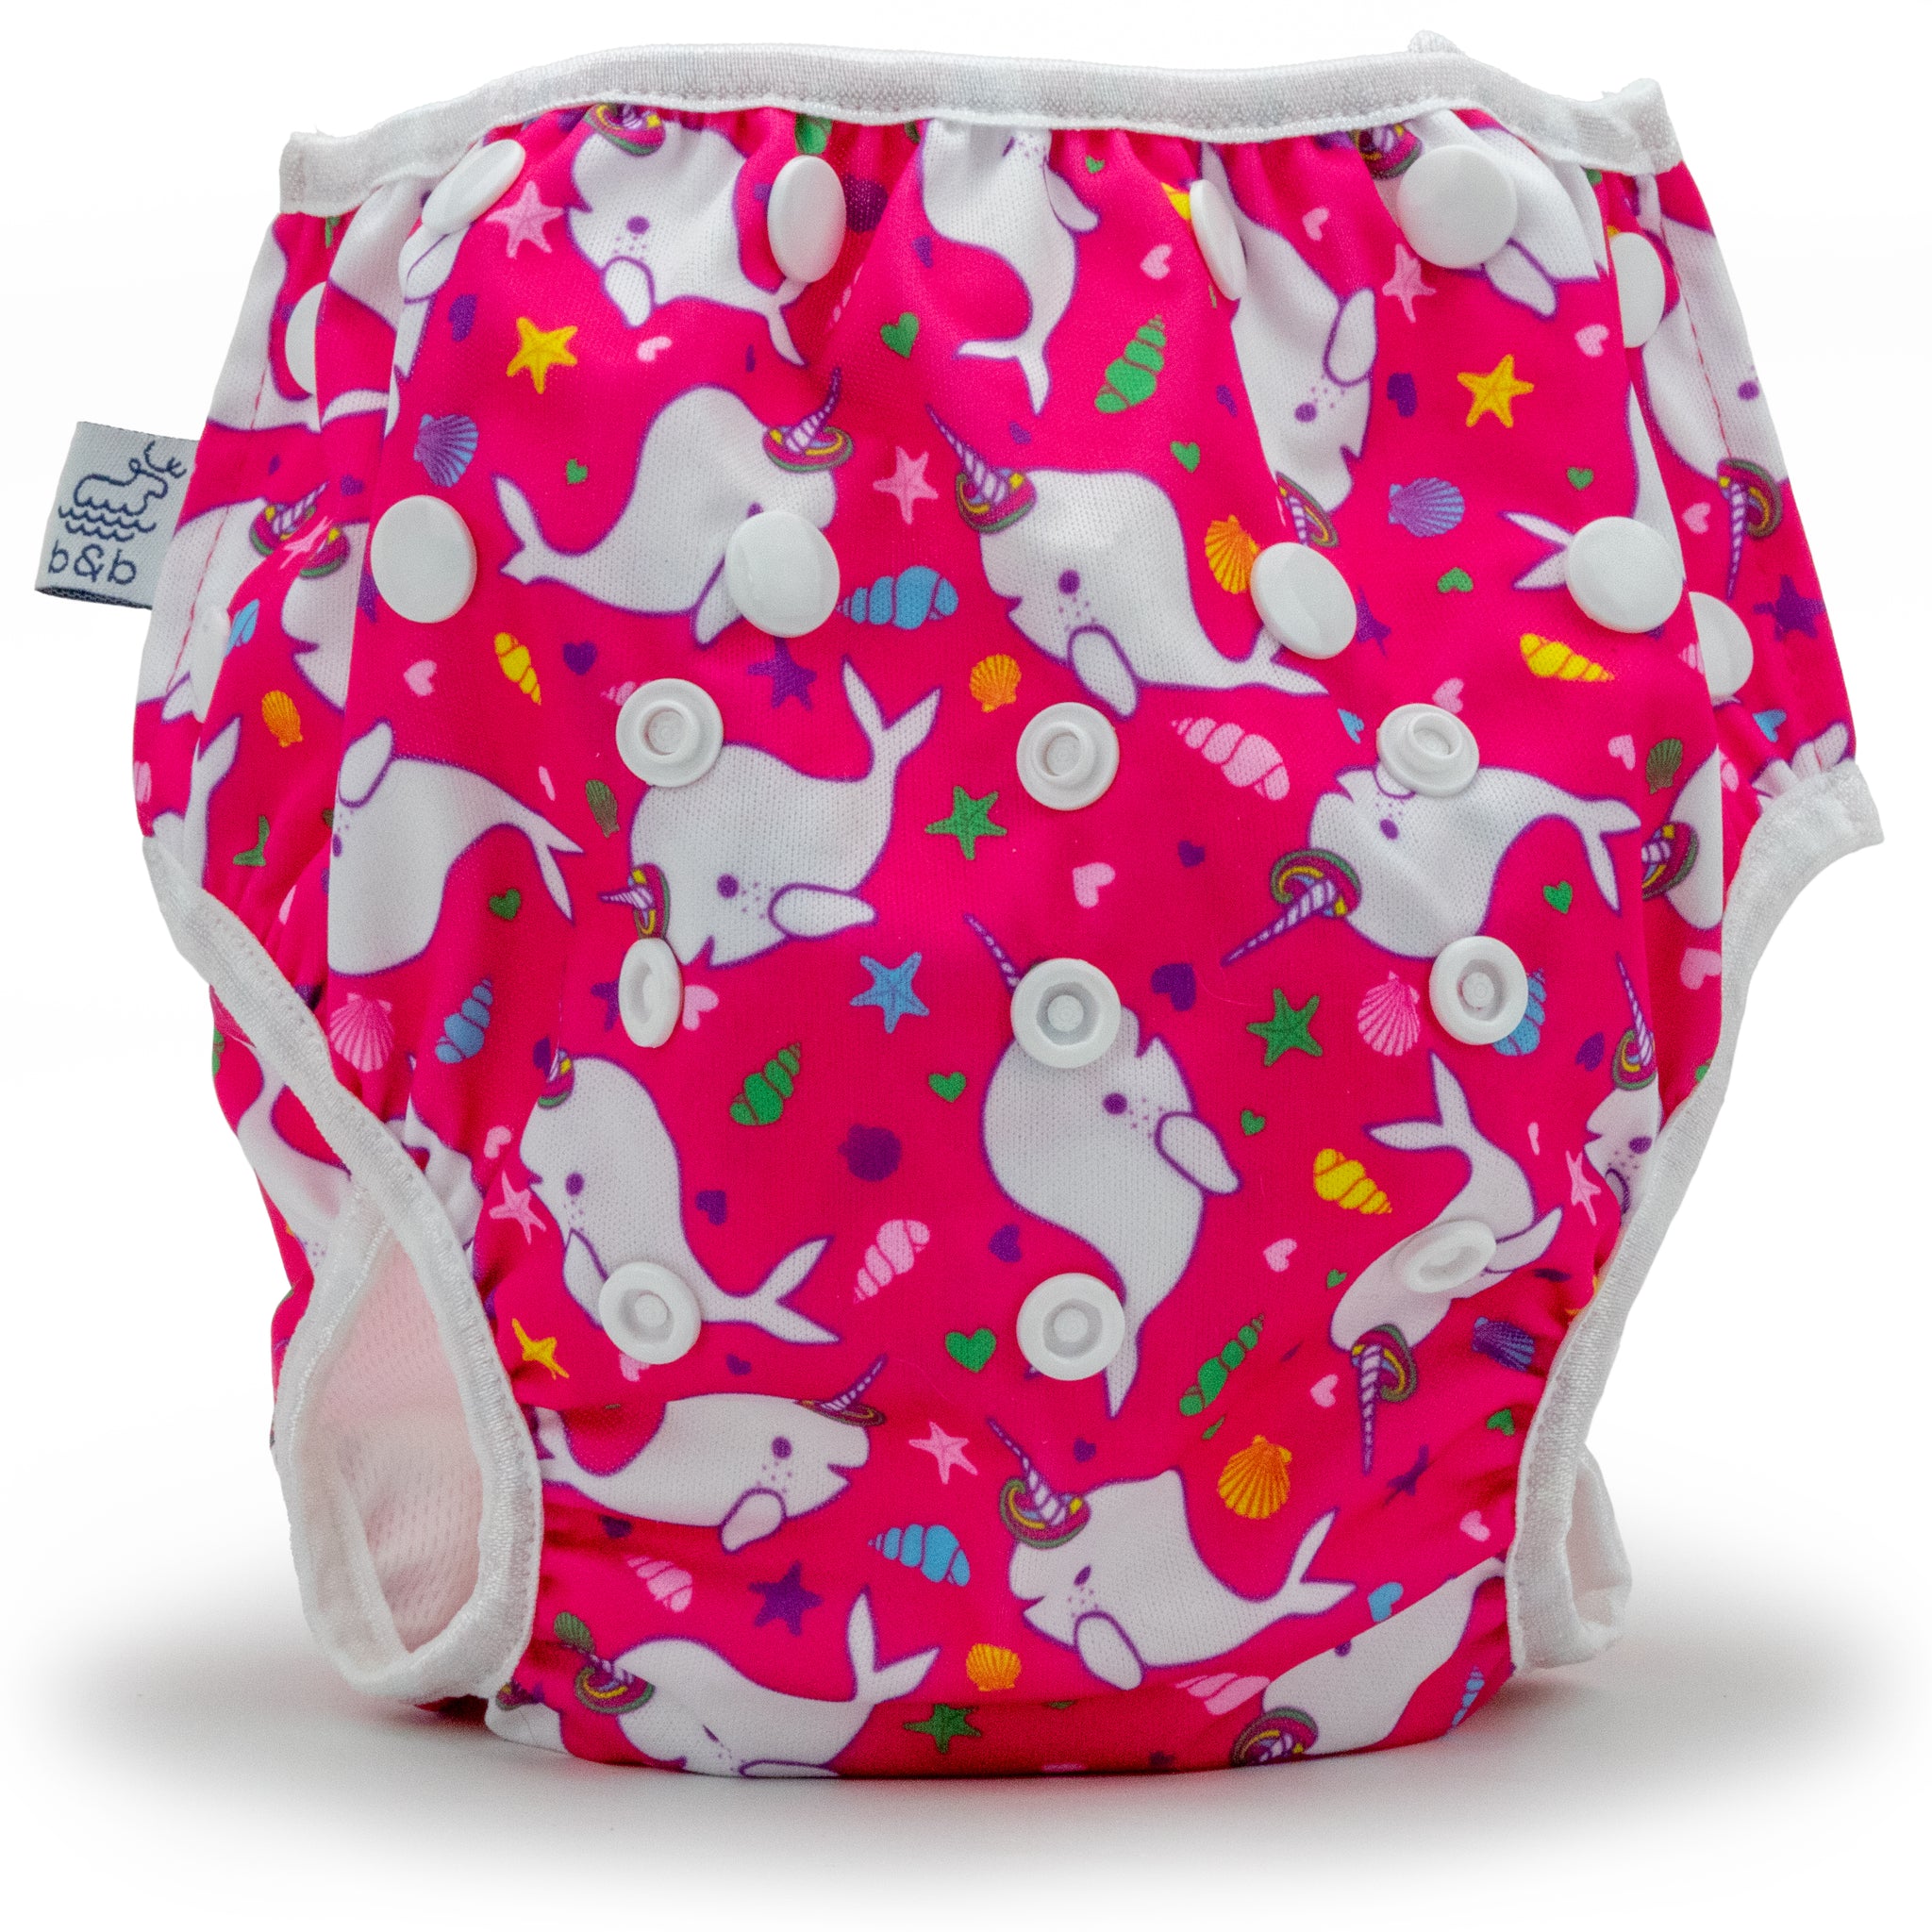 Reusable swim diaper with hot pink narhwal design, large size..